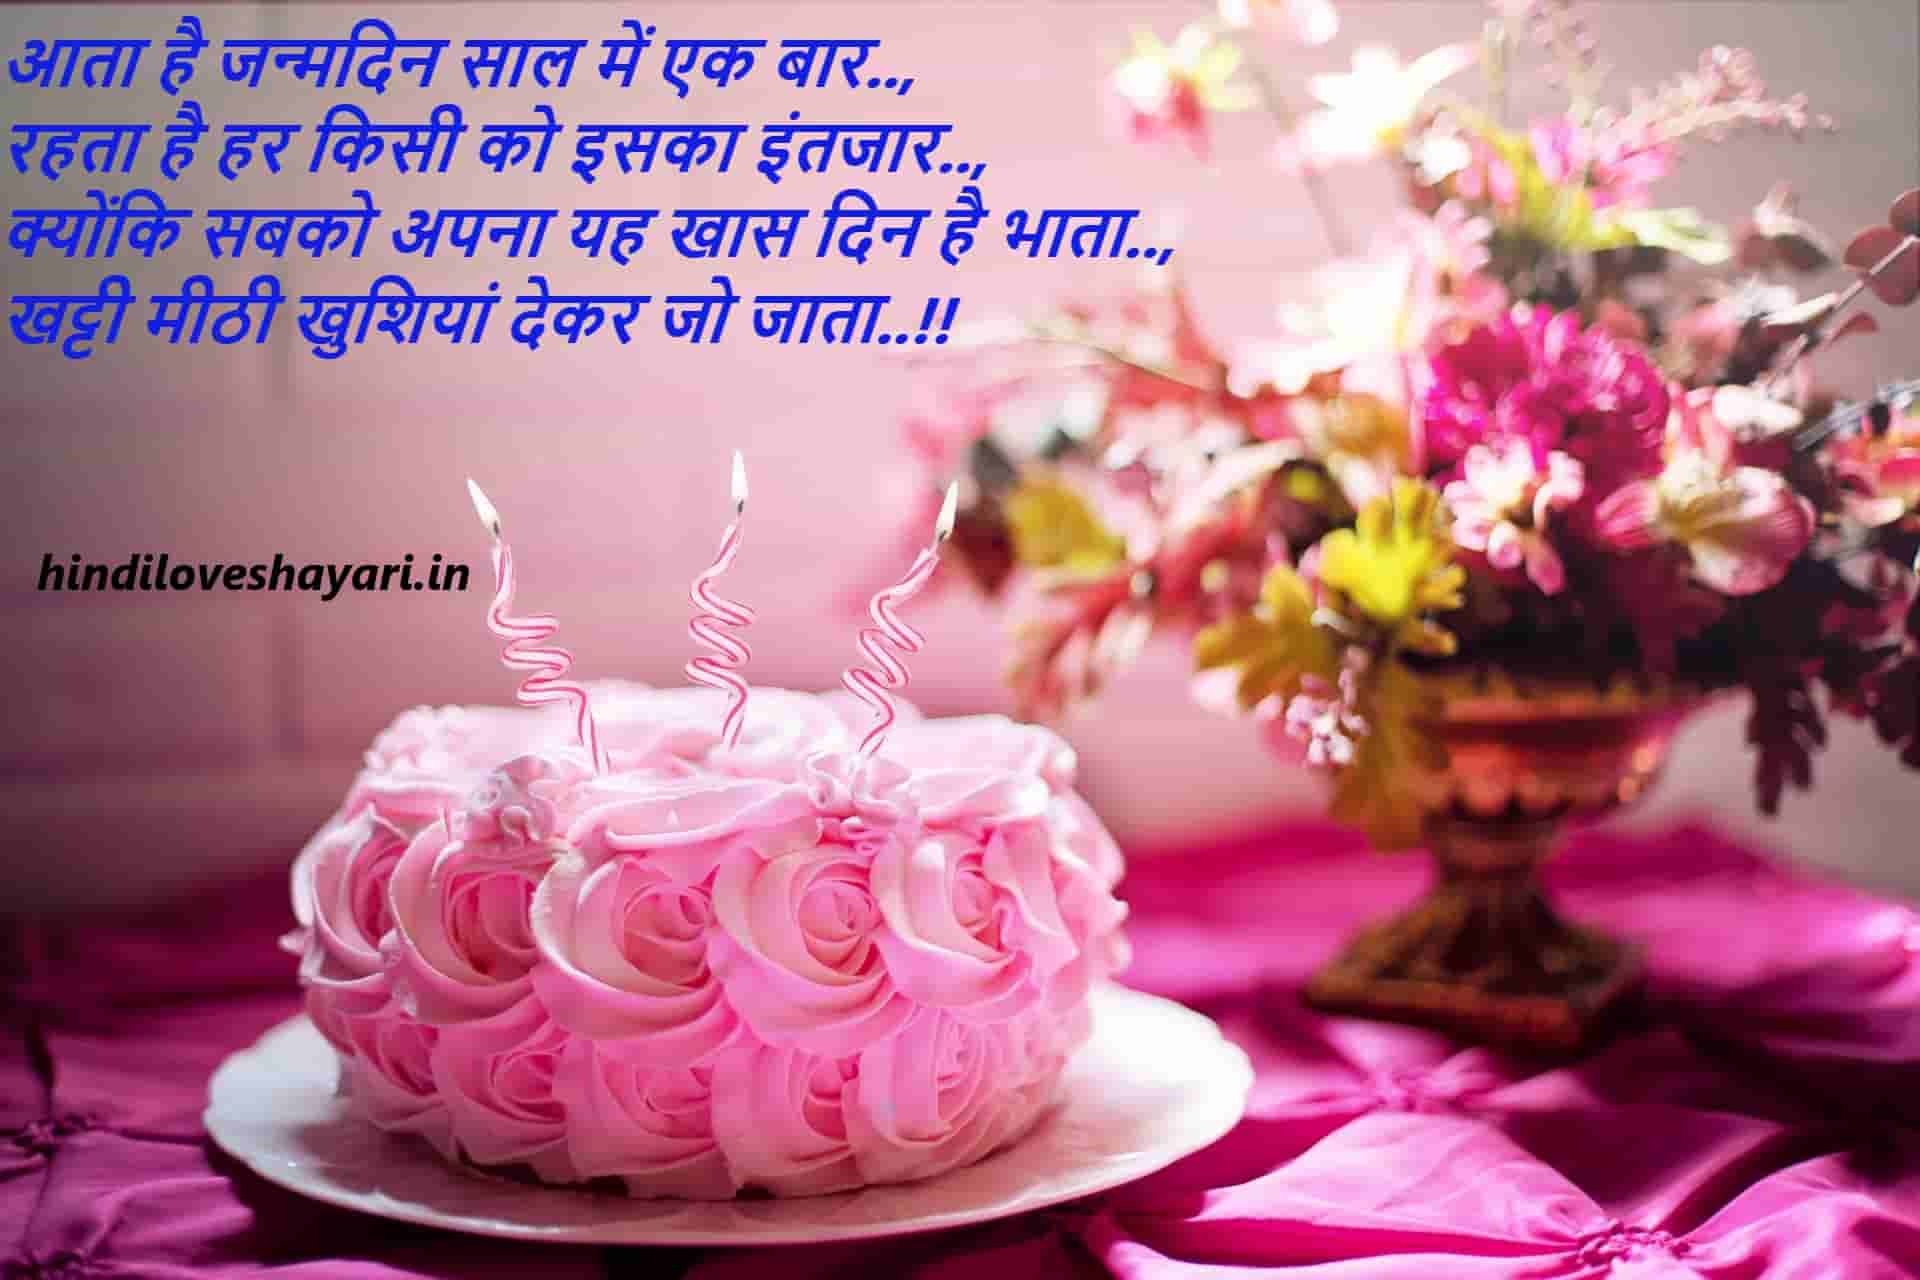 pink colour birthday cake with blue color of text wishesi s written on this picture